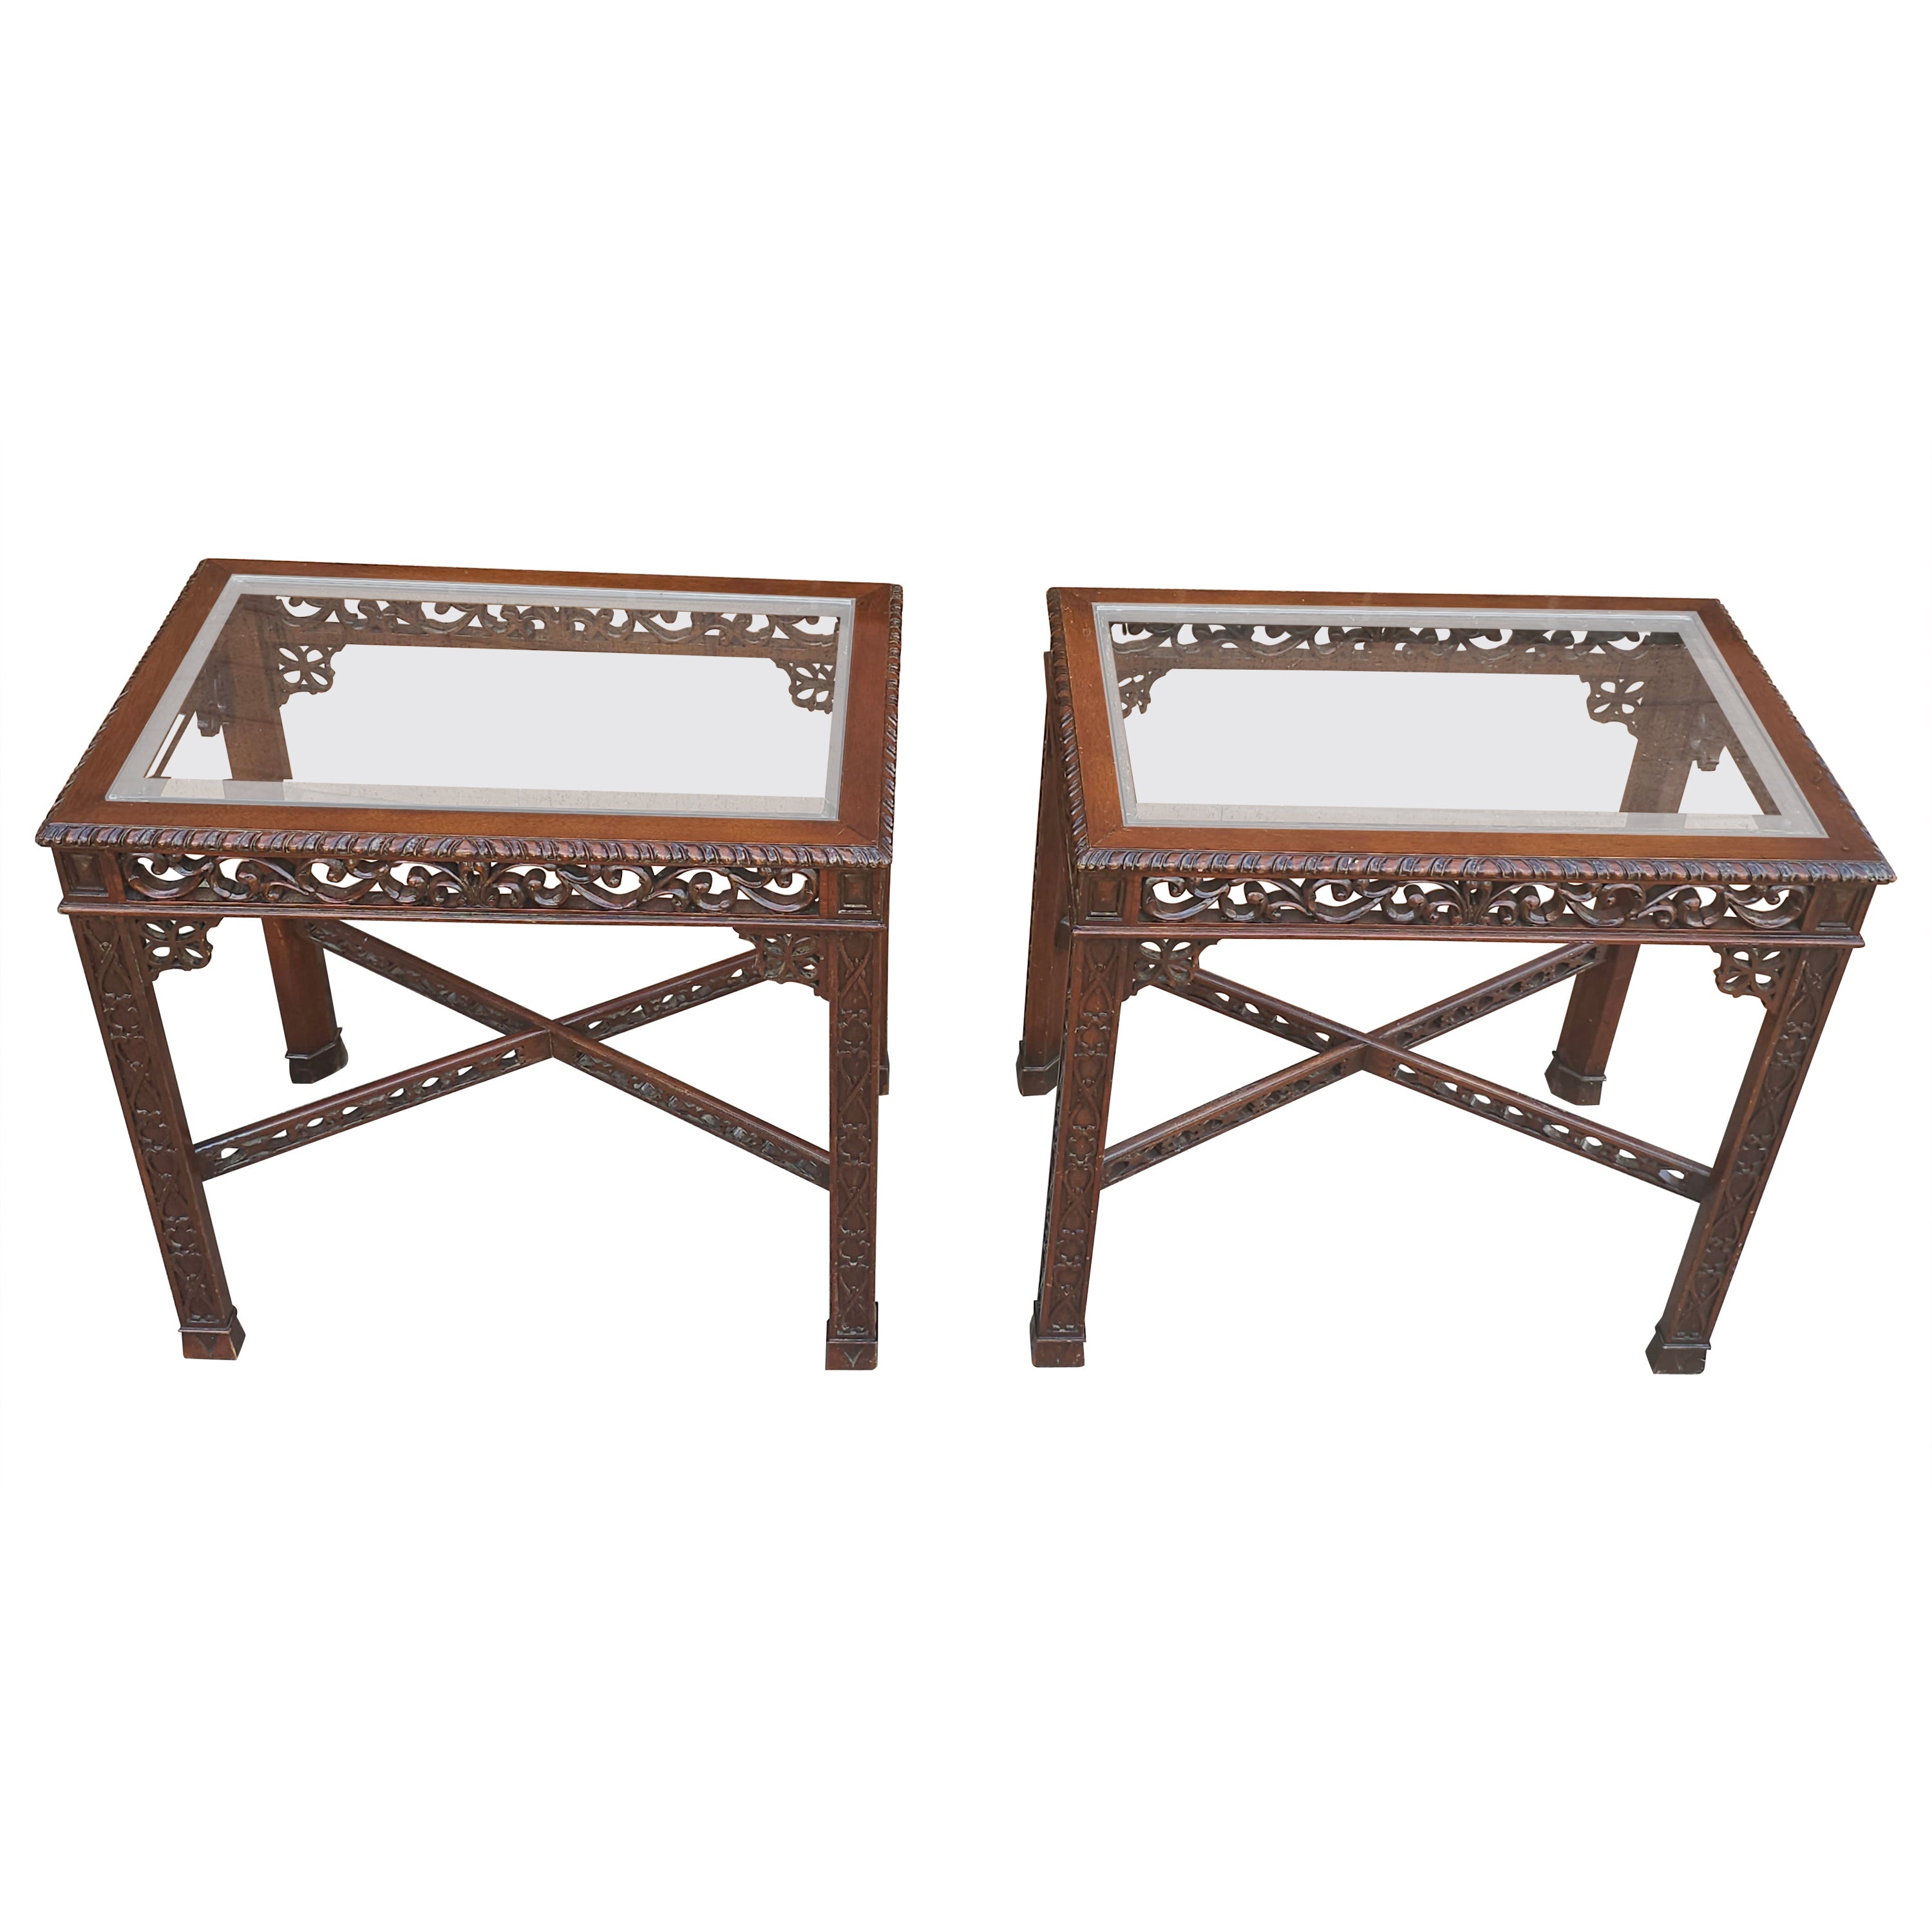 Pair Of Chinese Chippendale Style Fretwork and Glass Inset Mahogany Side Tables